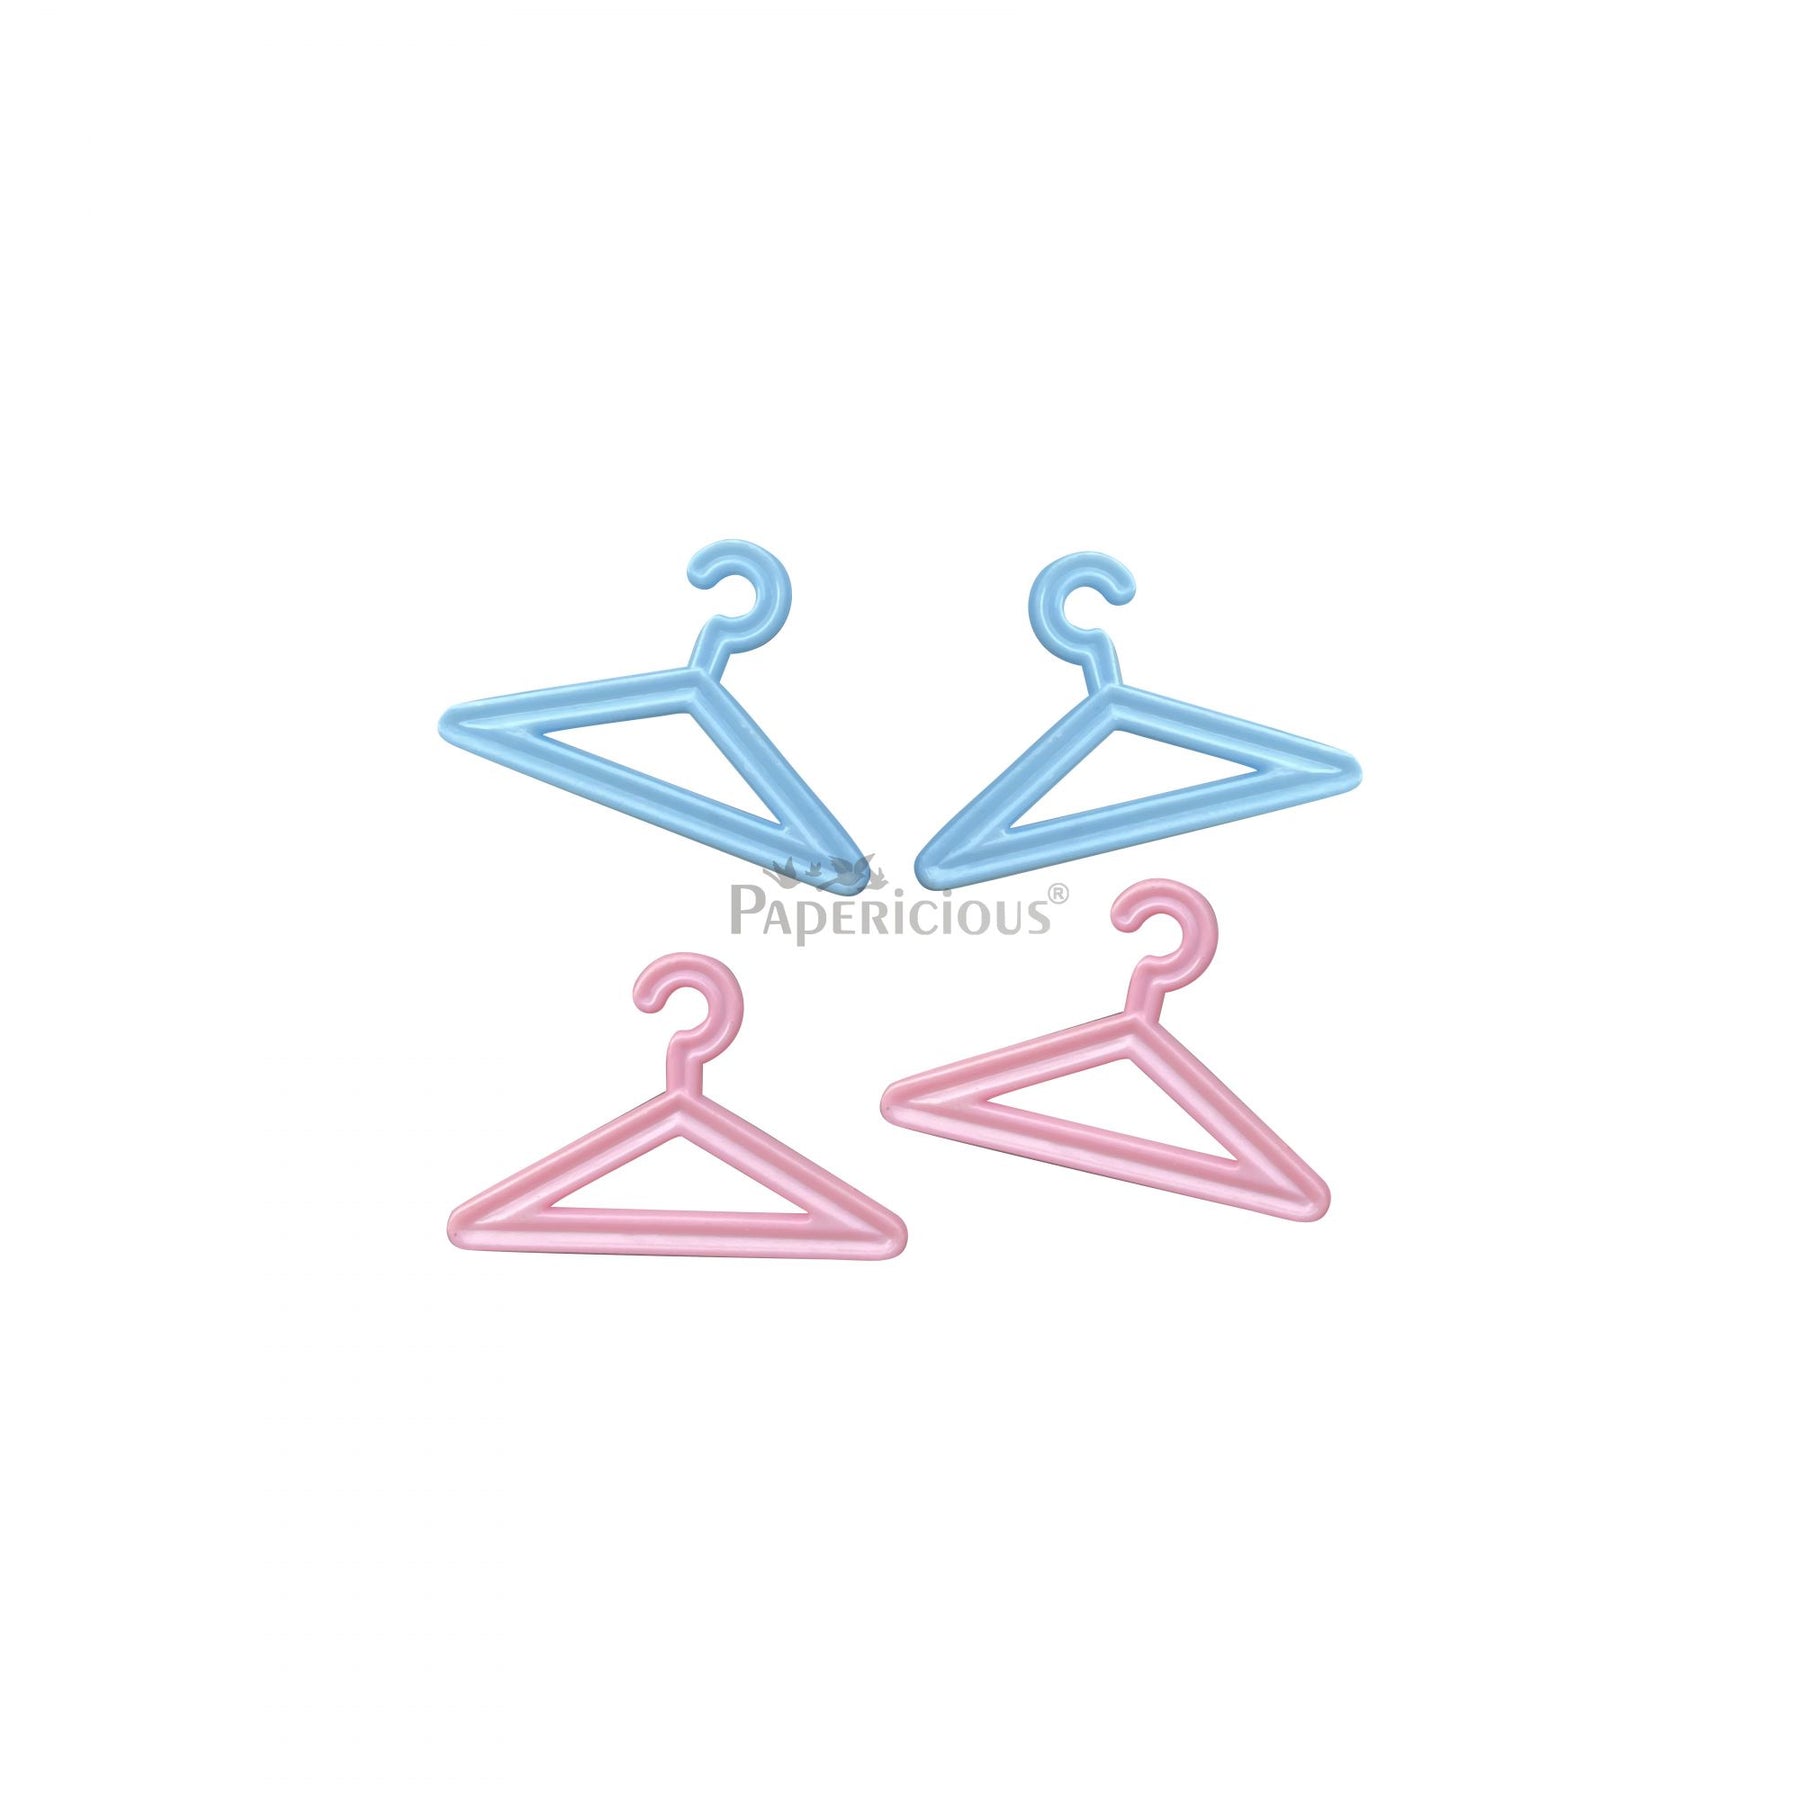 PAPERICIOUS - Baby Hanger Embellishment - Ready to Use - 4 Pc